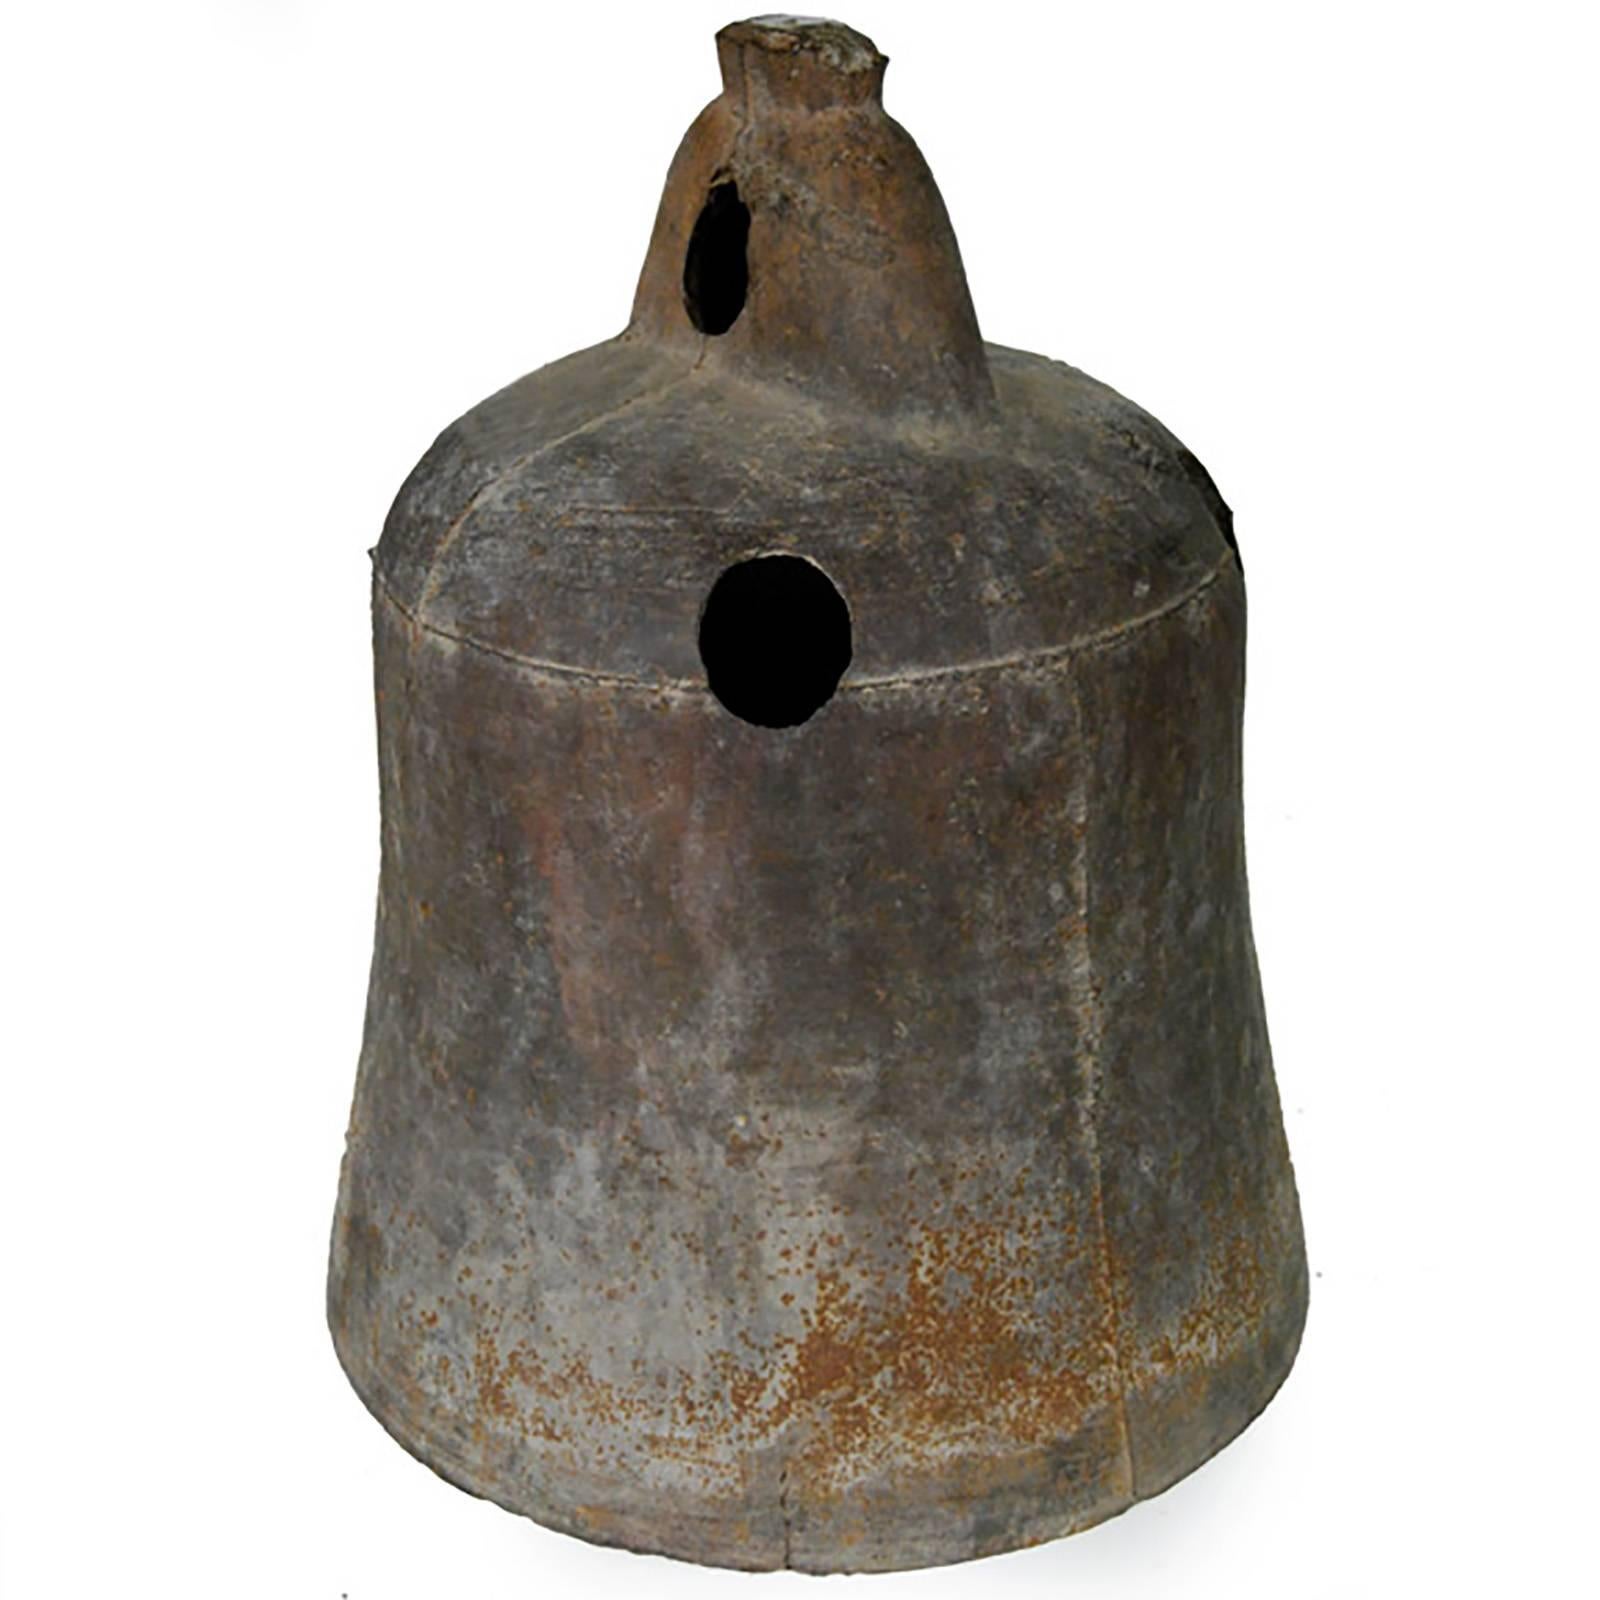 This rustic, 19th century iron bell once pealed in celebration or gave notice of important events in a town in northern China. Marked with holes to affix the clapper or insert a pole, the bell looks lovely lit from within by a flickering candle or